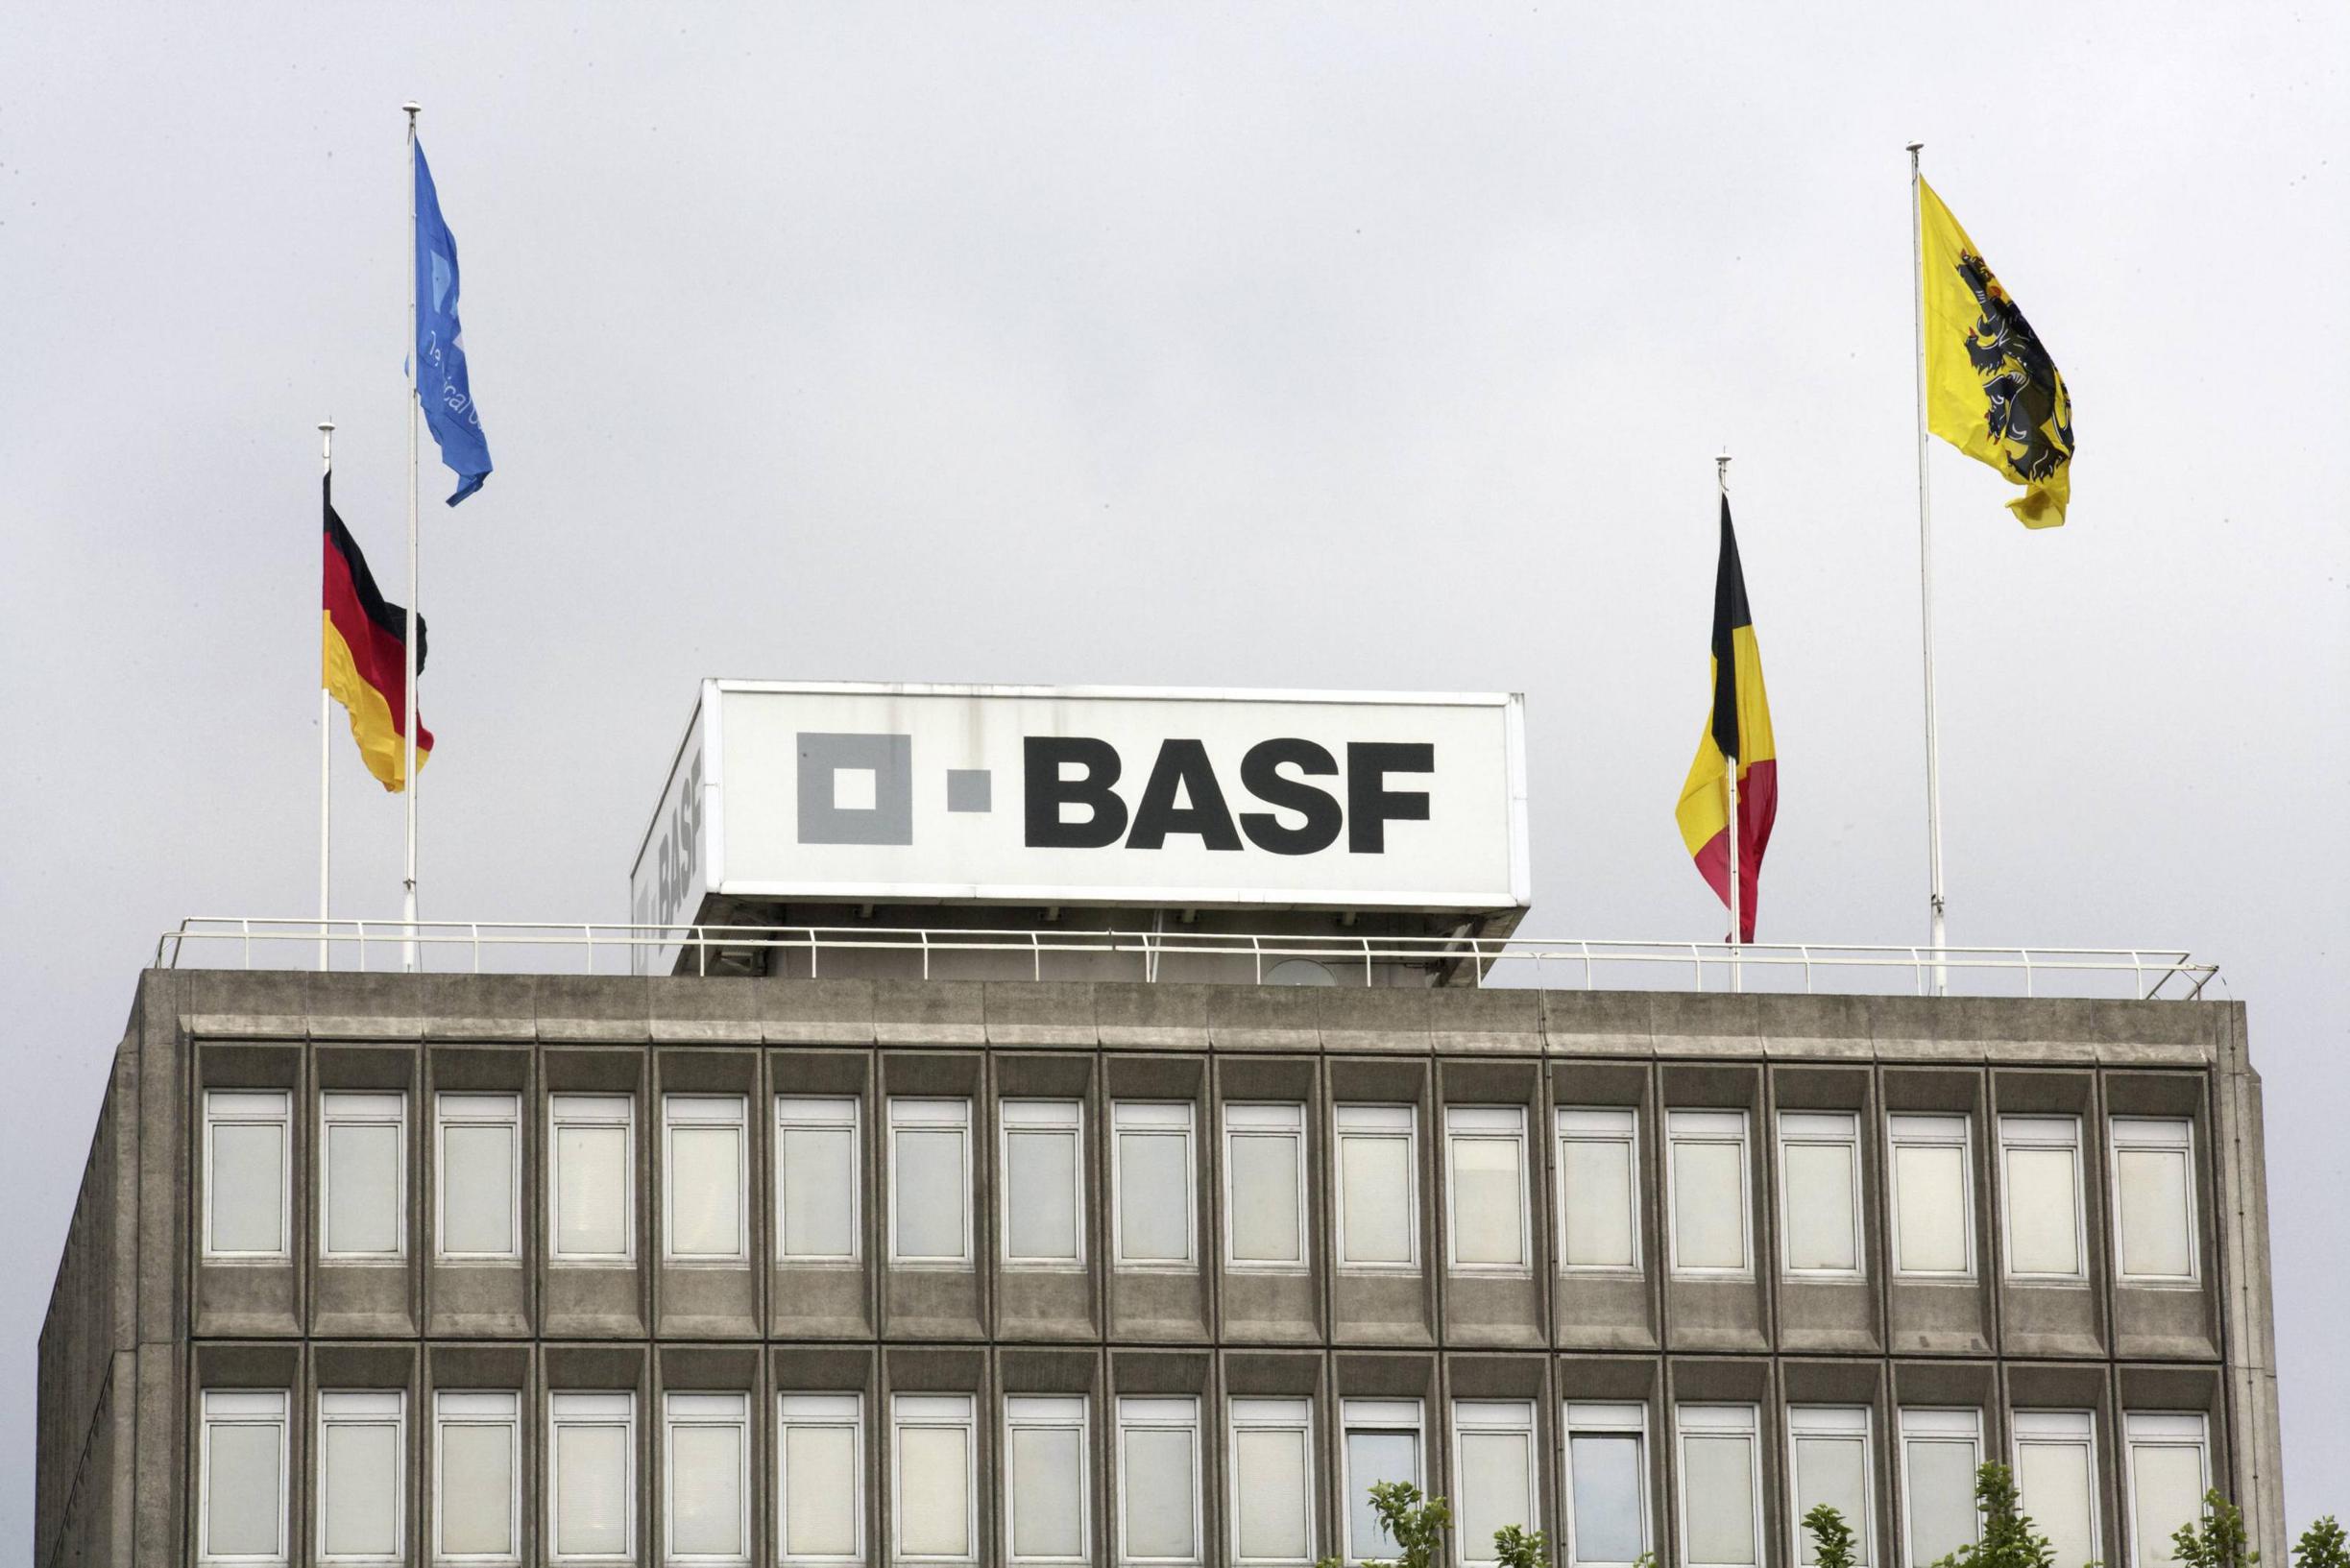 BASF, a major chemical company, to reduce workforce